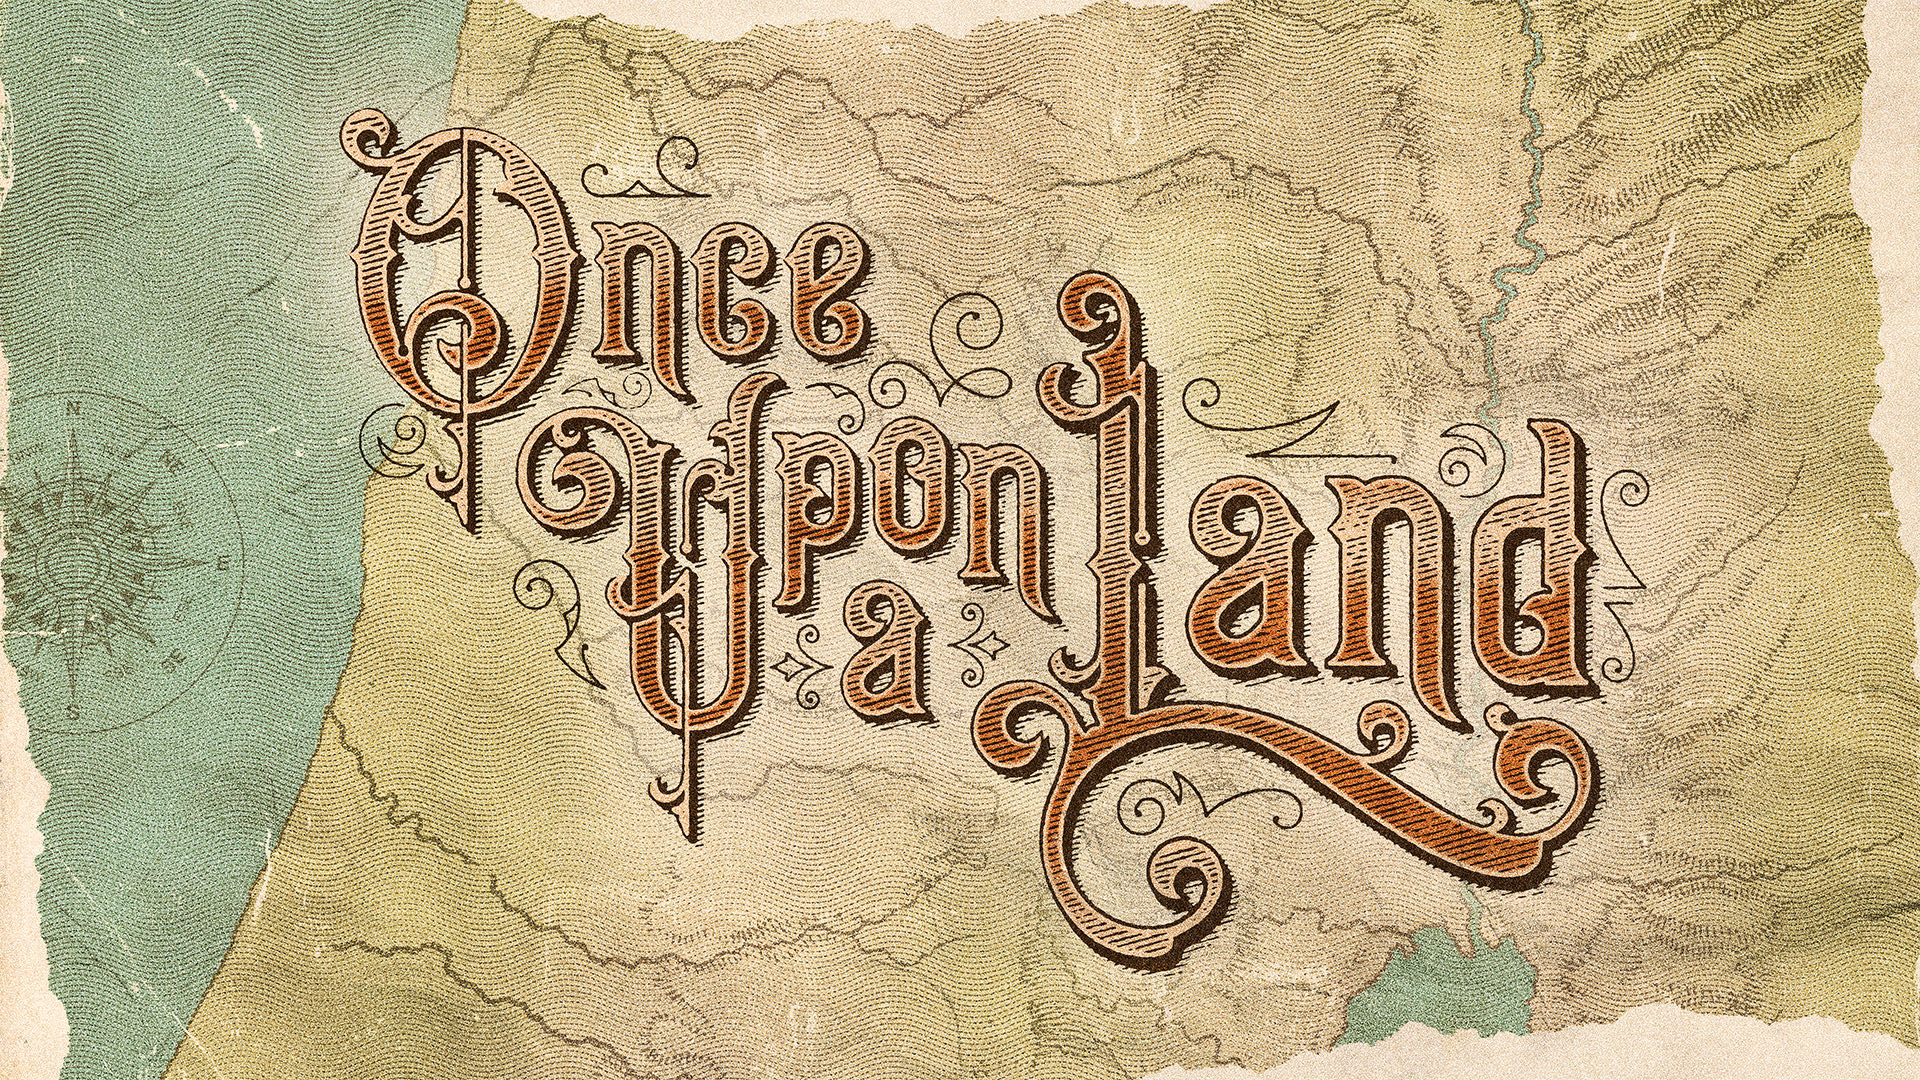 Once Upon a Land